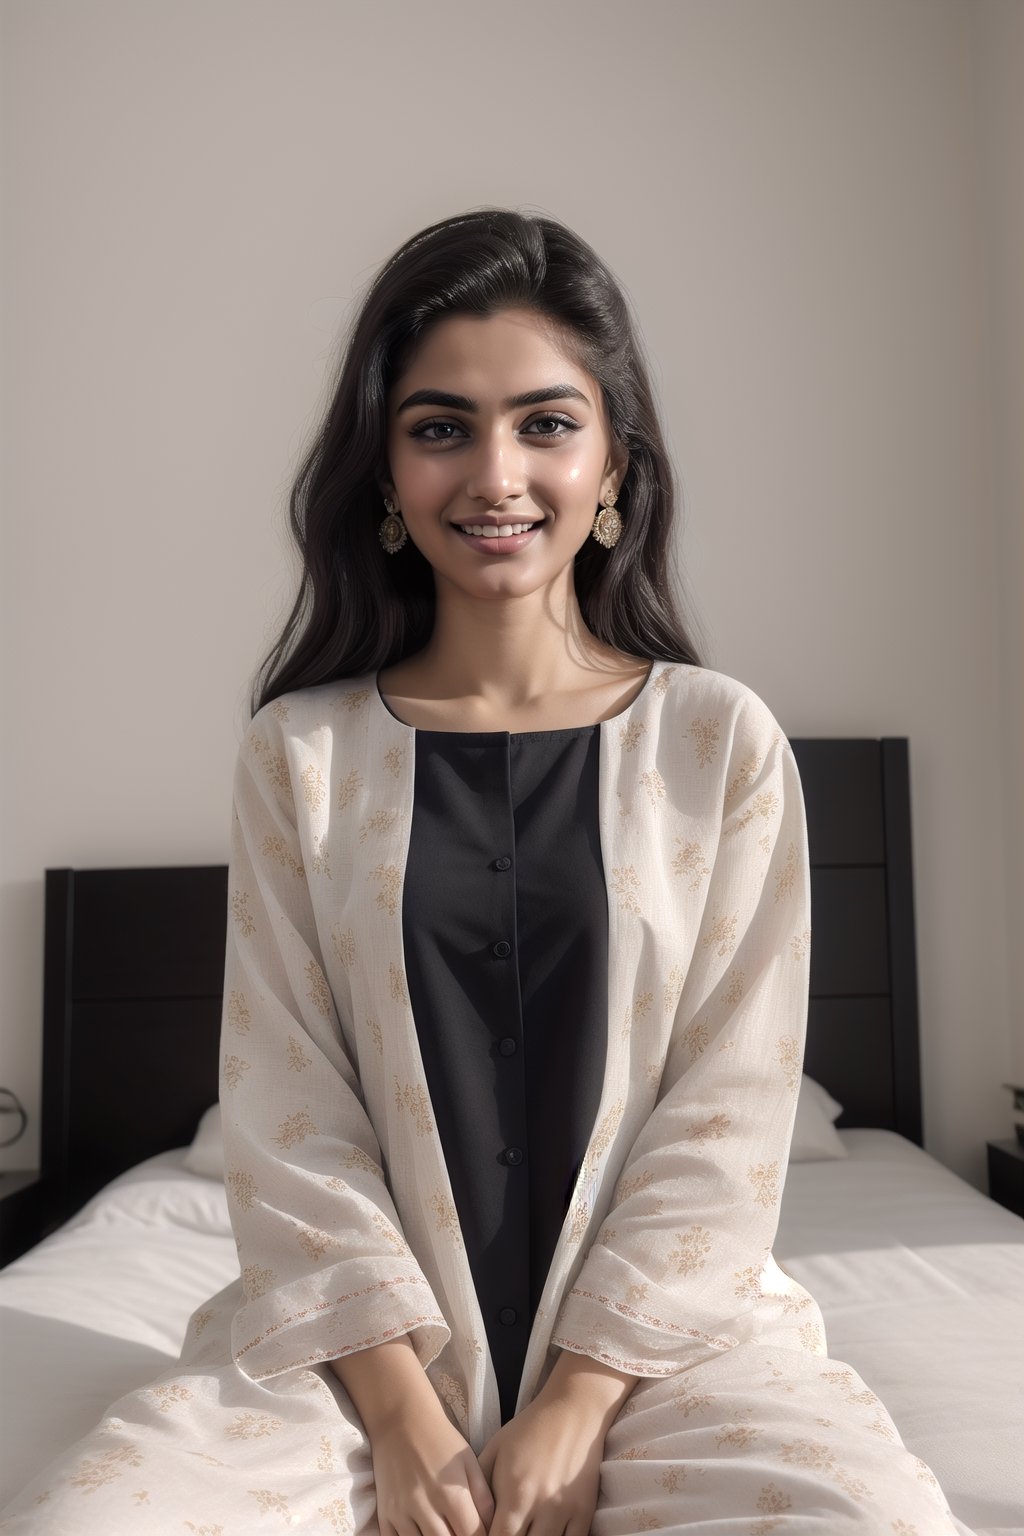  A stunning 18-year-old pakistani beauty,,sit in his bed room with piercing black eyes and a radiant smile, captured in hyper-realistic detail. She is dressed in a white printed shalwar kameez